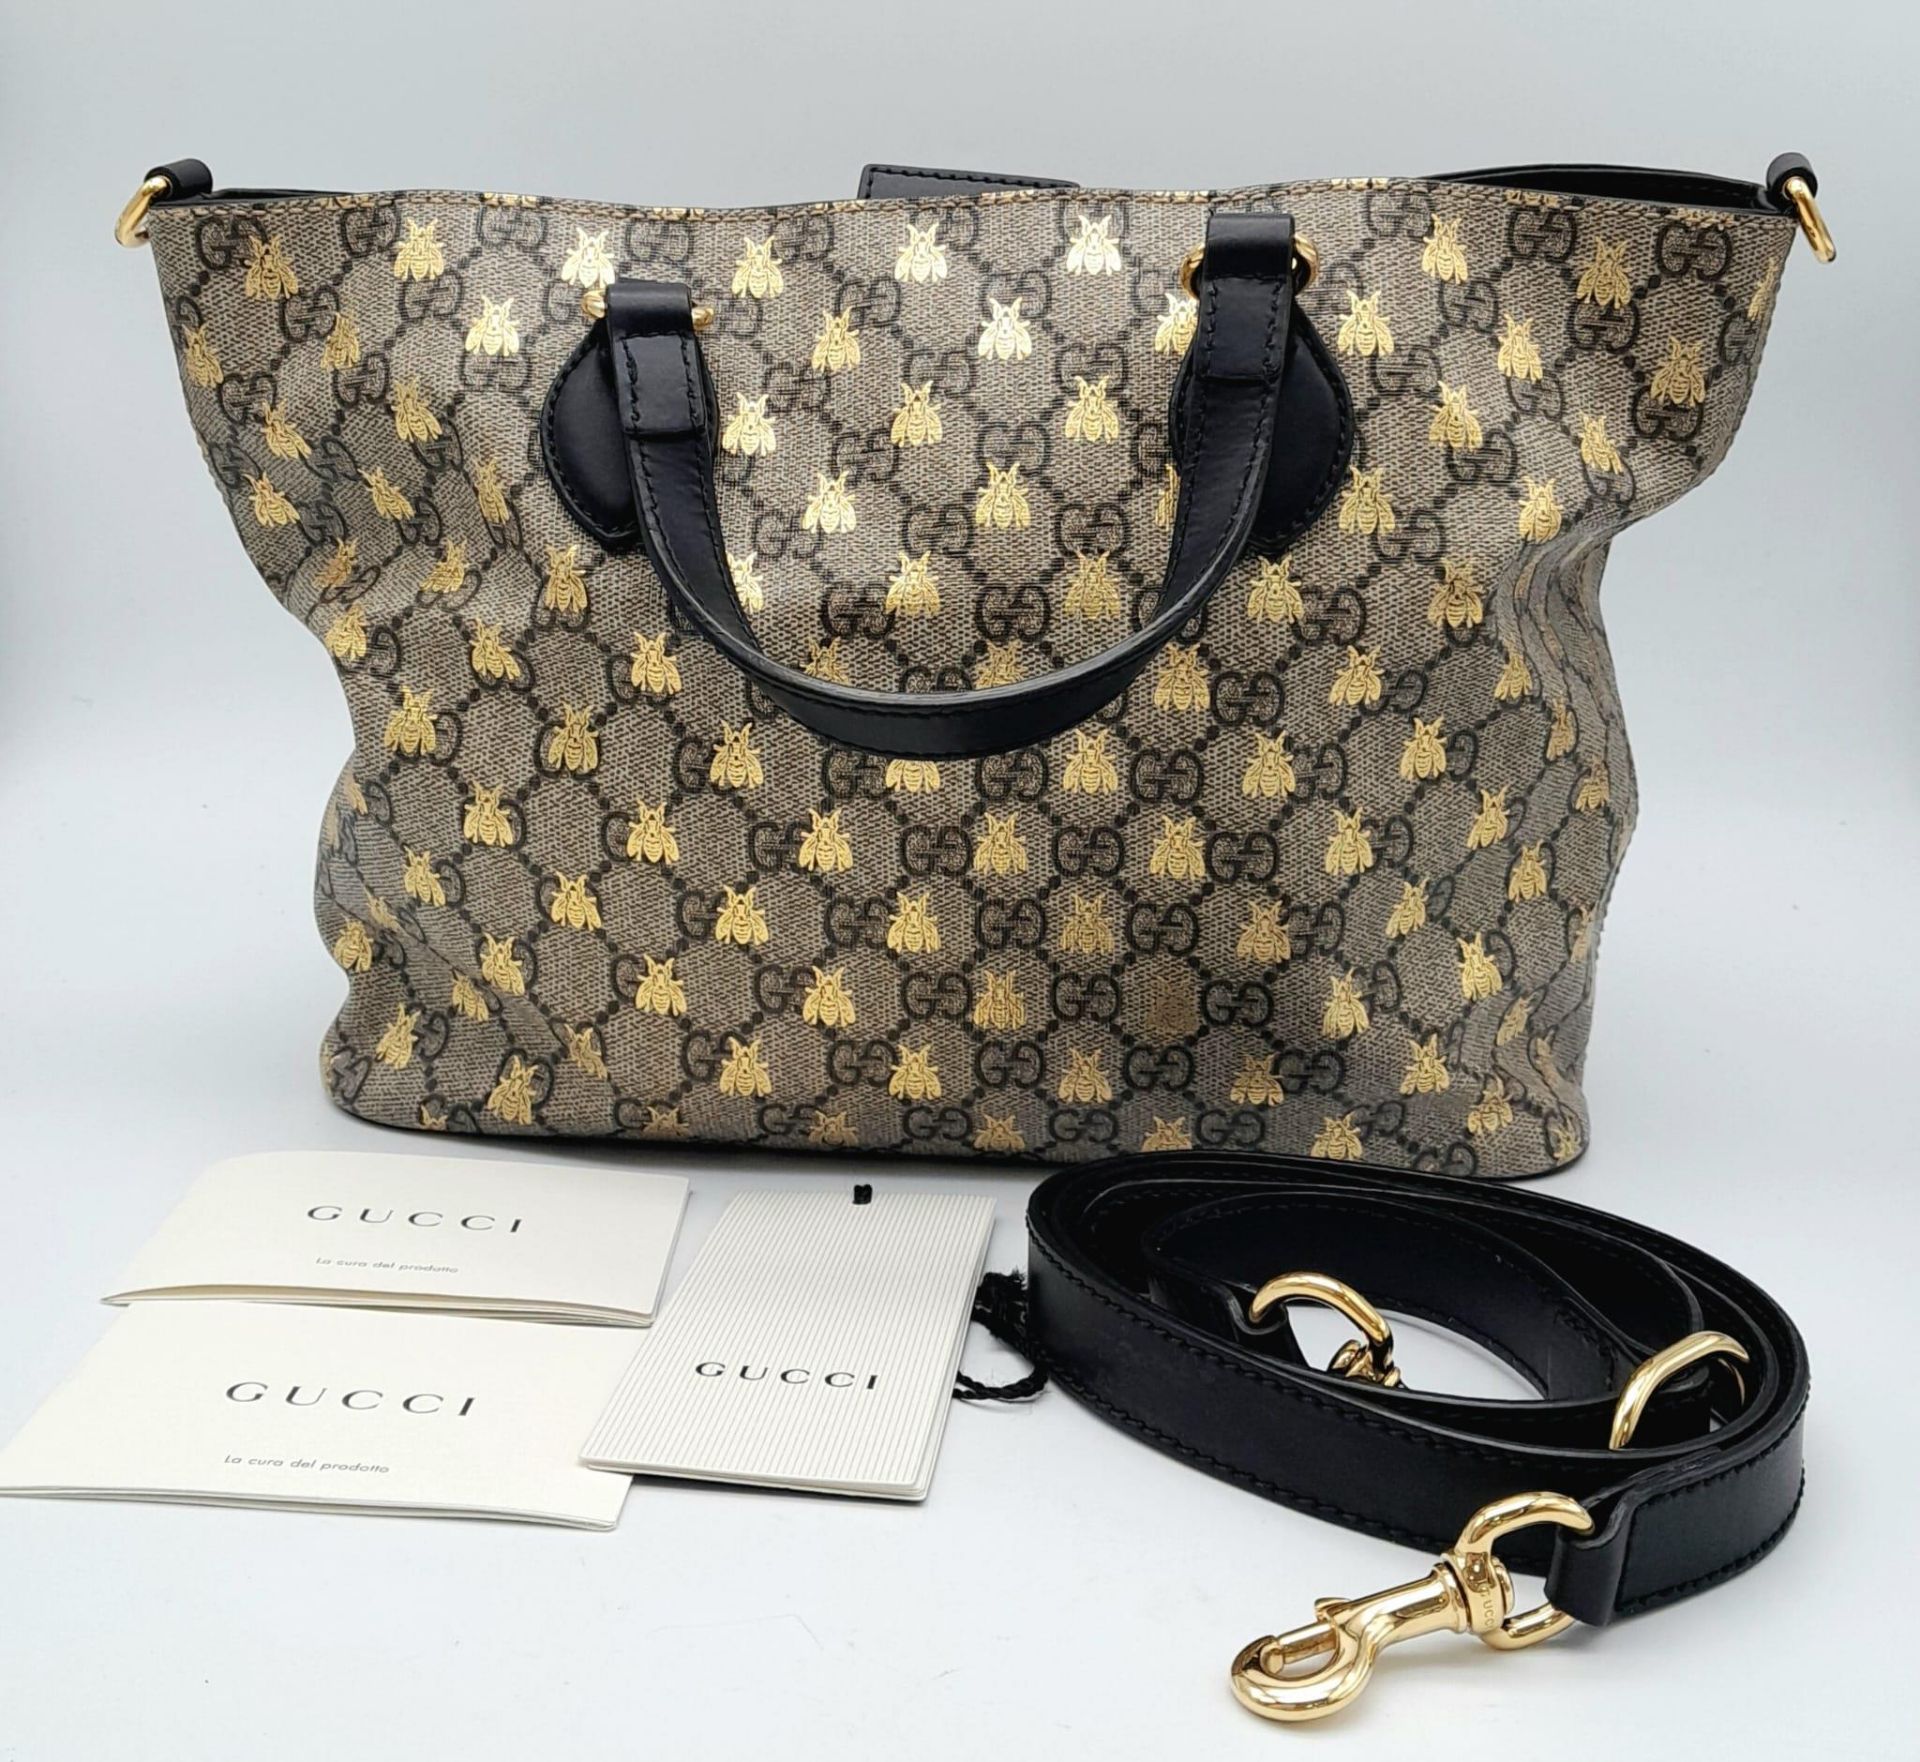 GUCCI GG Supreme Bee Satchel, This satchel features a coated canvas body, flat leather handles, a - Image 8 of 8